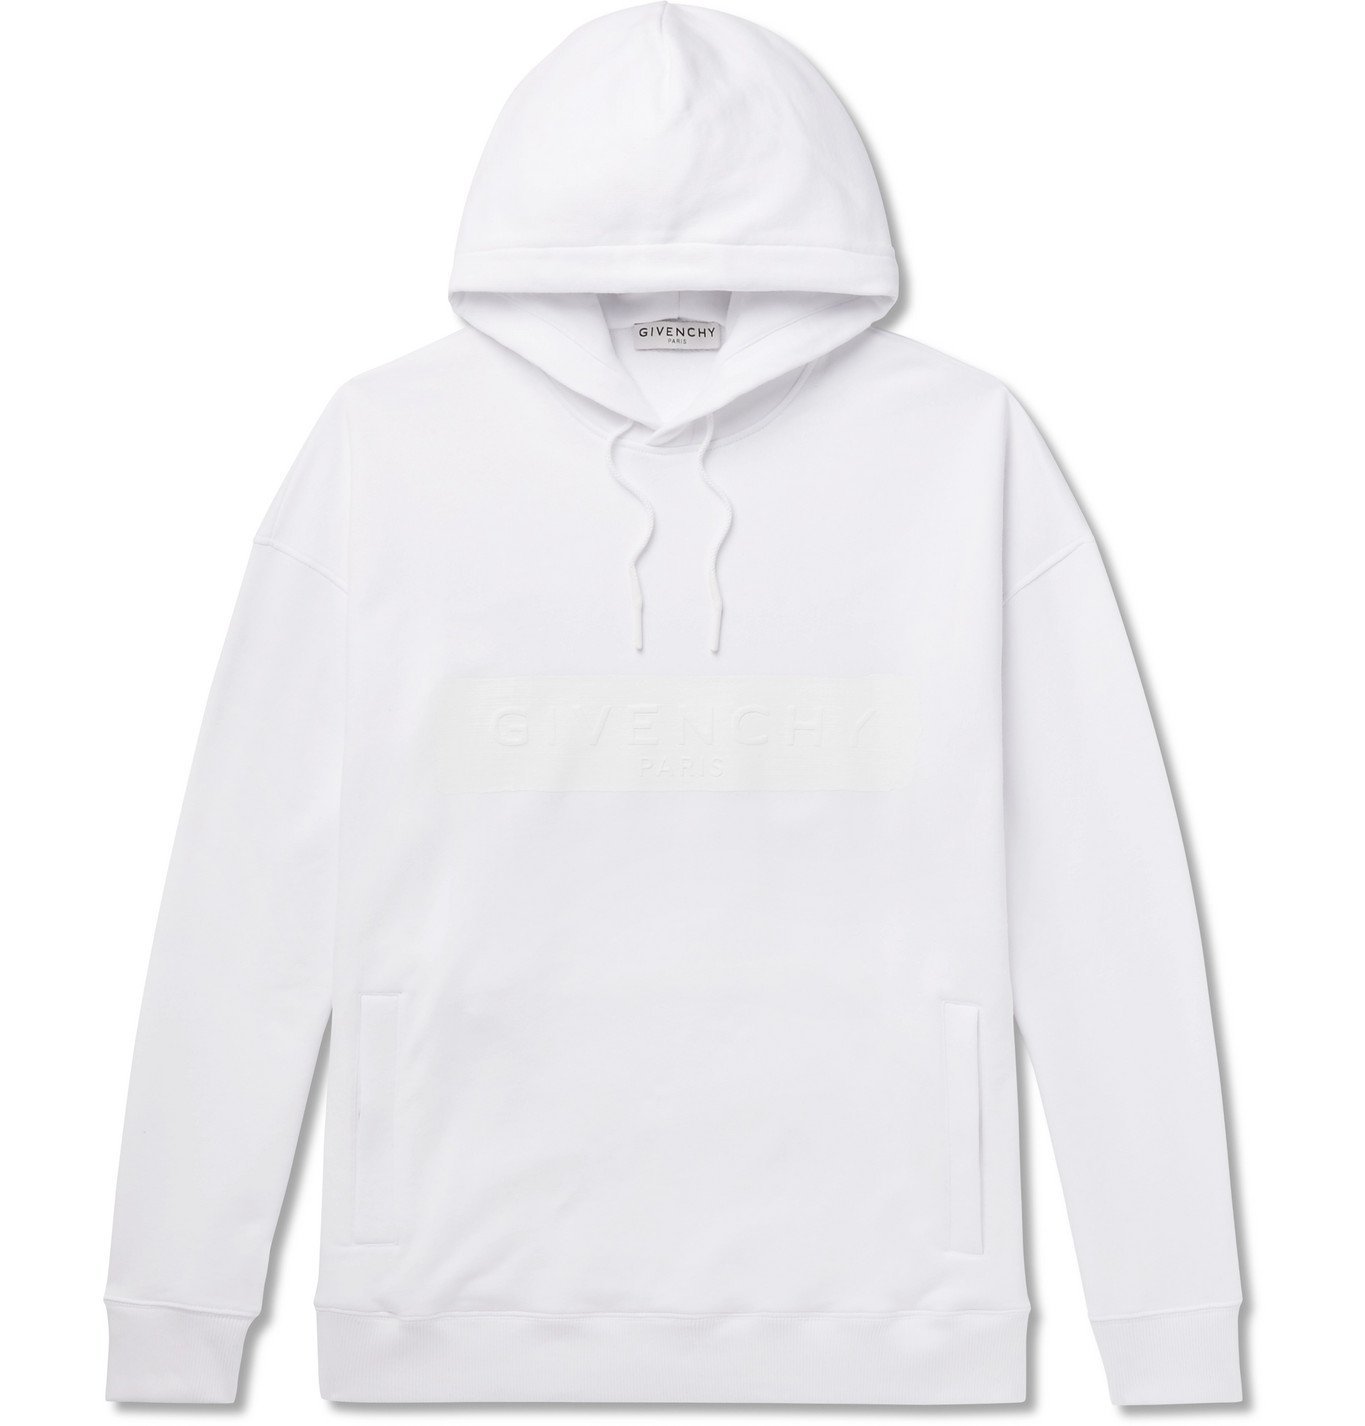 givenchy hoodie white